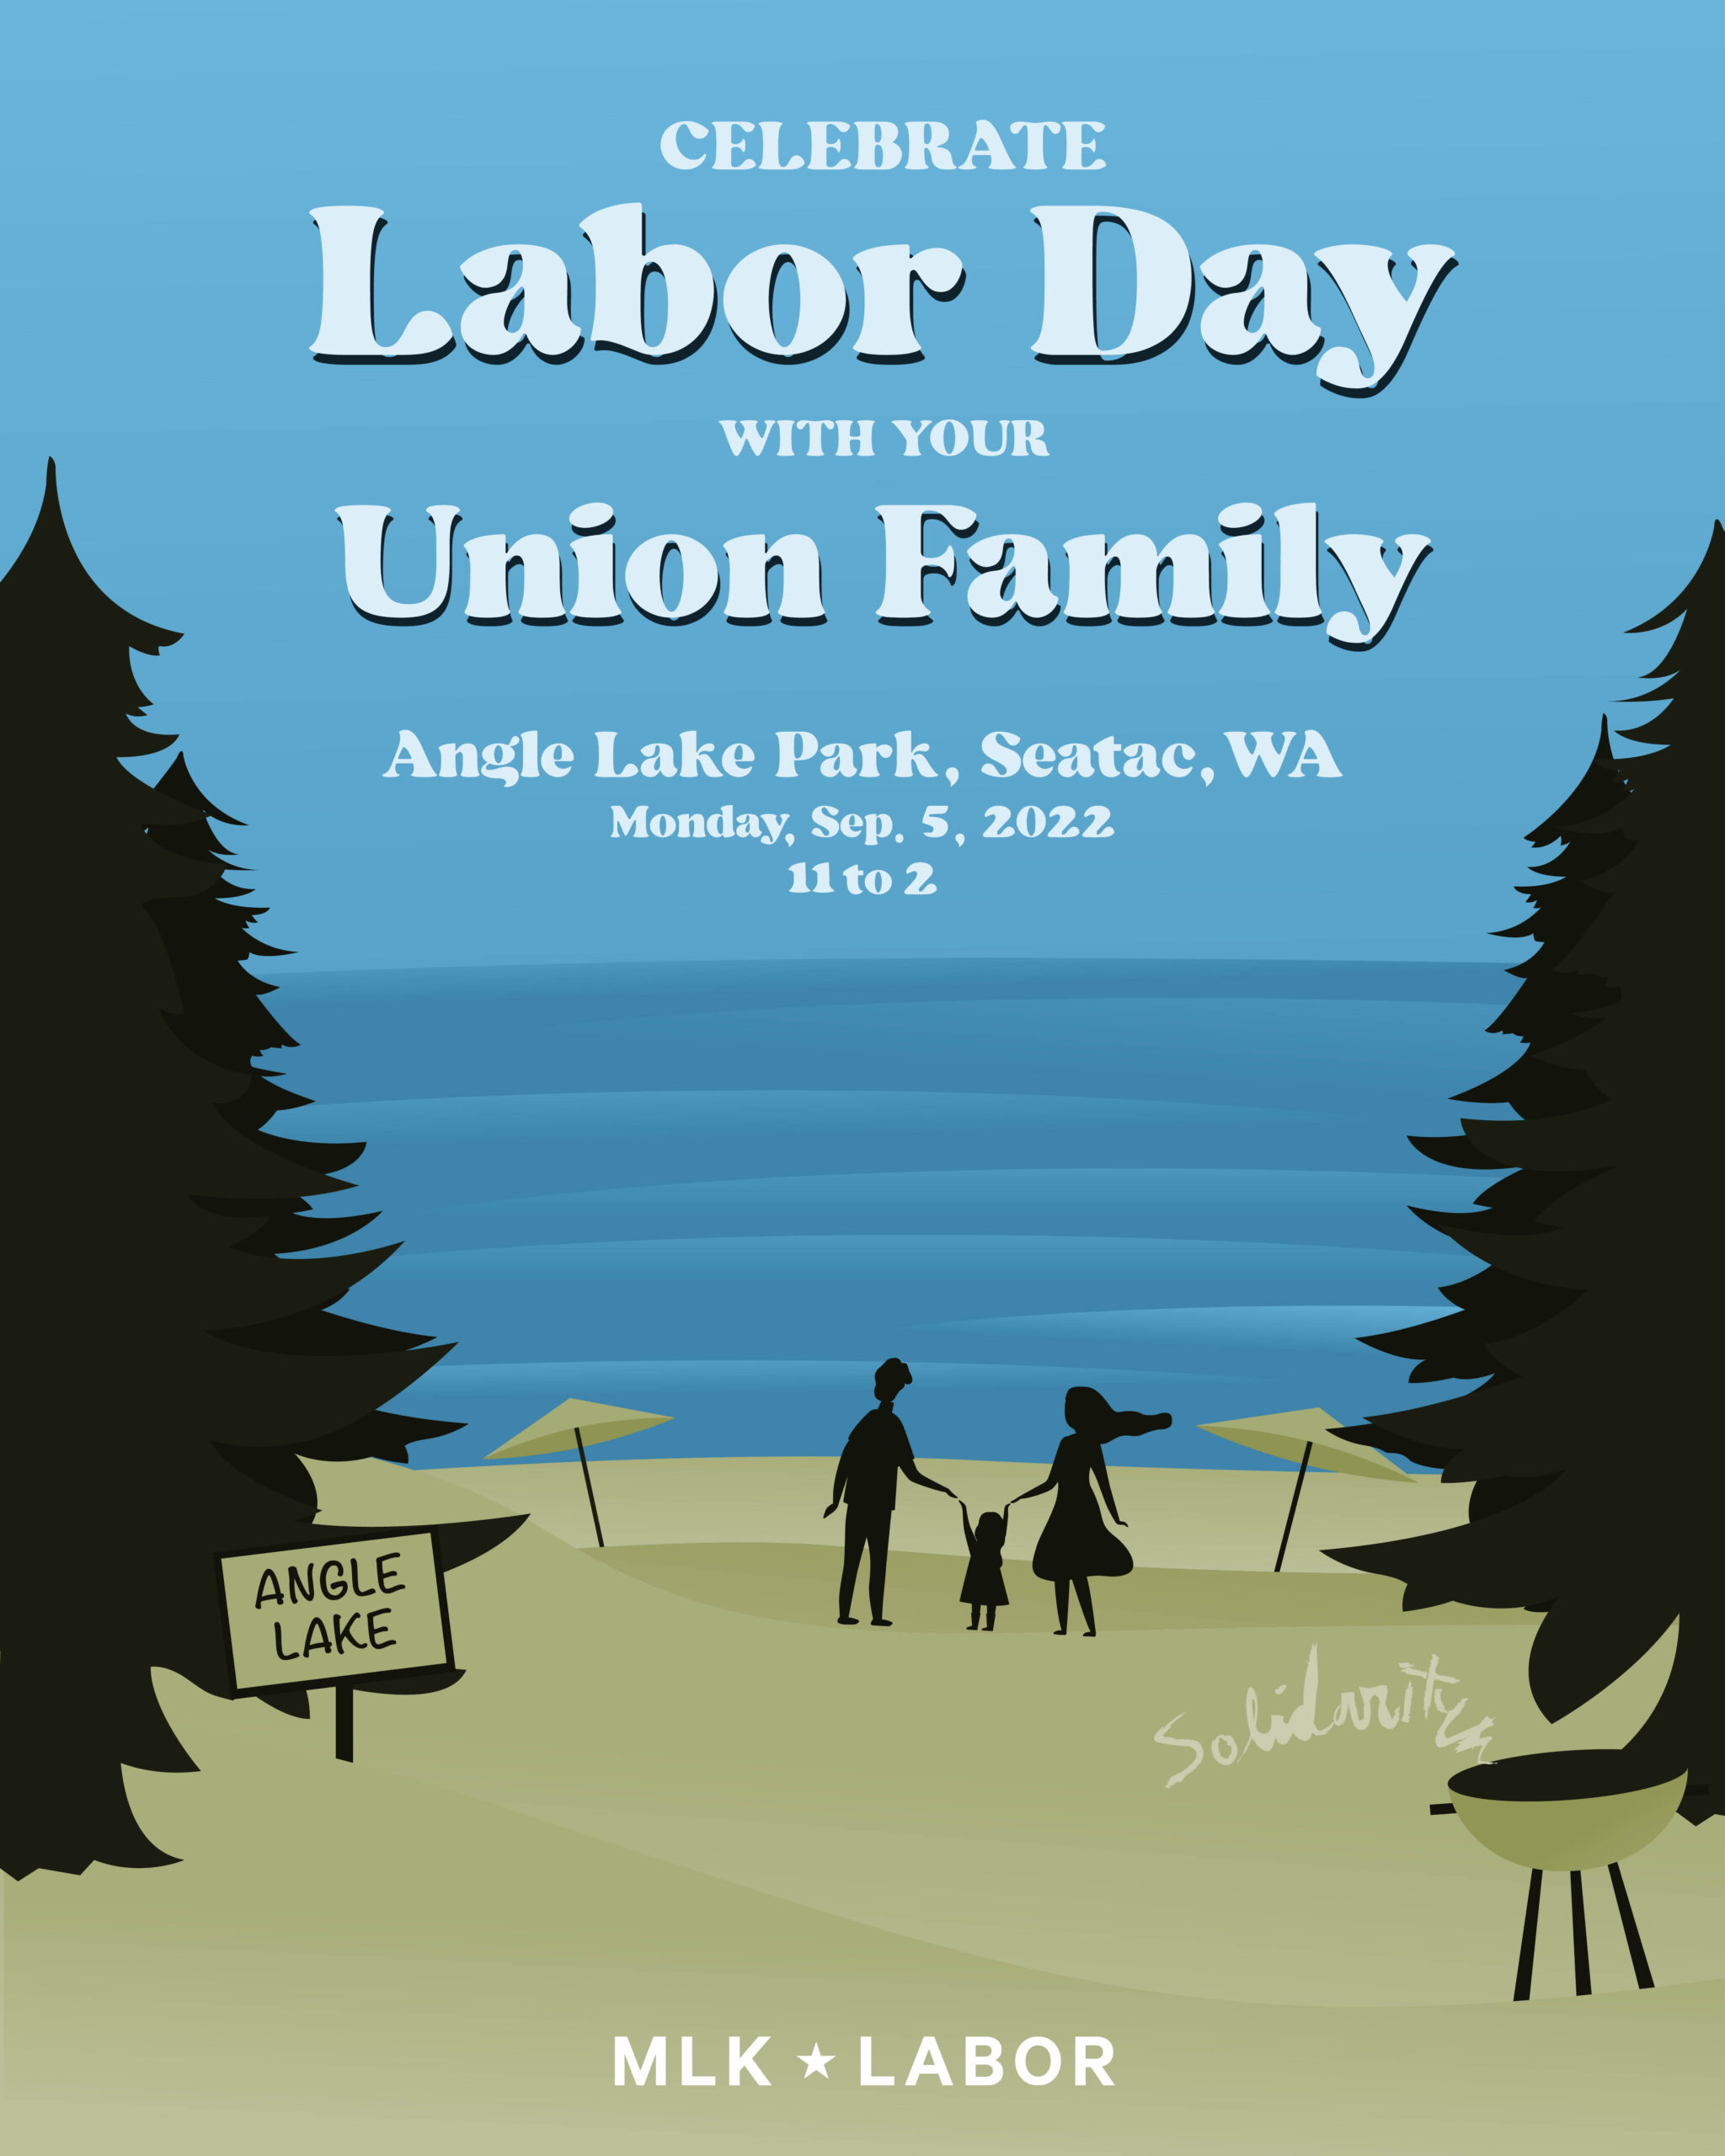 Illustration of the beach between two trees. People are pictured enjoying the water and scene. There is a sign that says "Angle Lake" and the text over the image reads, "Celebrate Labor Day with your Union Family at Angle Lake Park in SeaTac, WA on Mon., Sep. 5 2022 from 11 a.m. - 2 p.m.